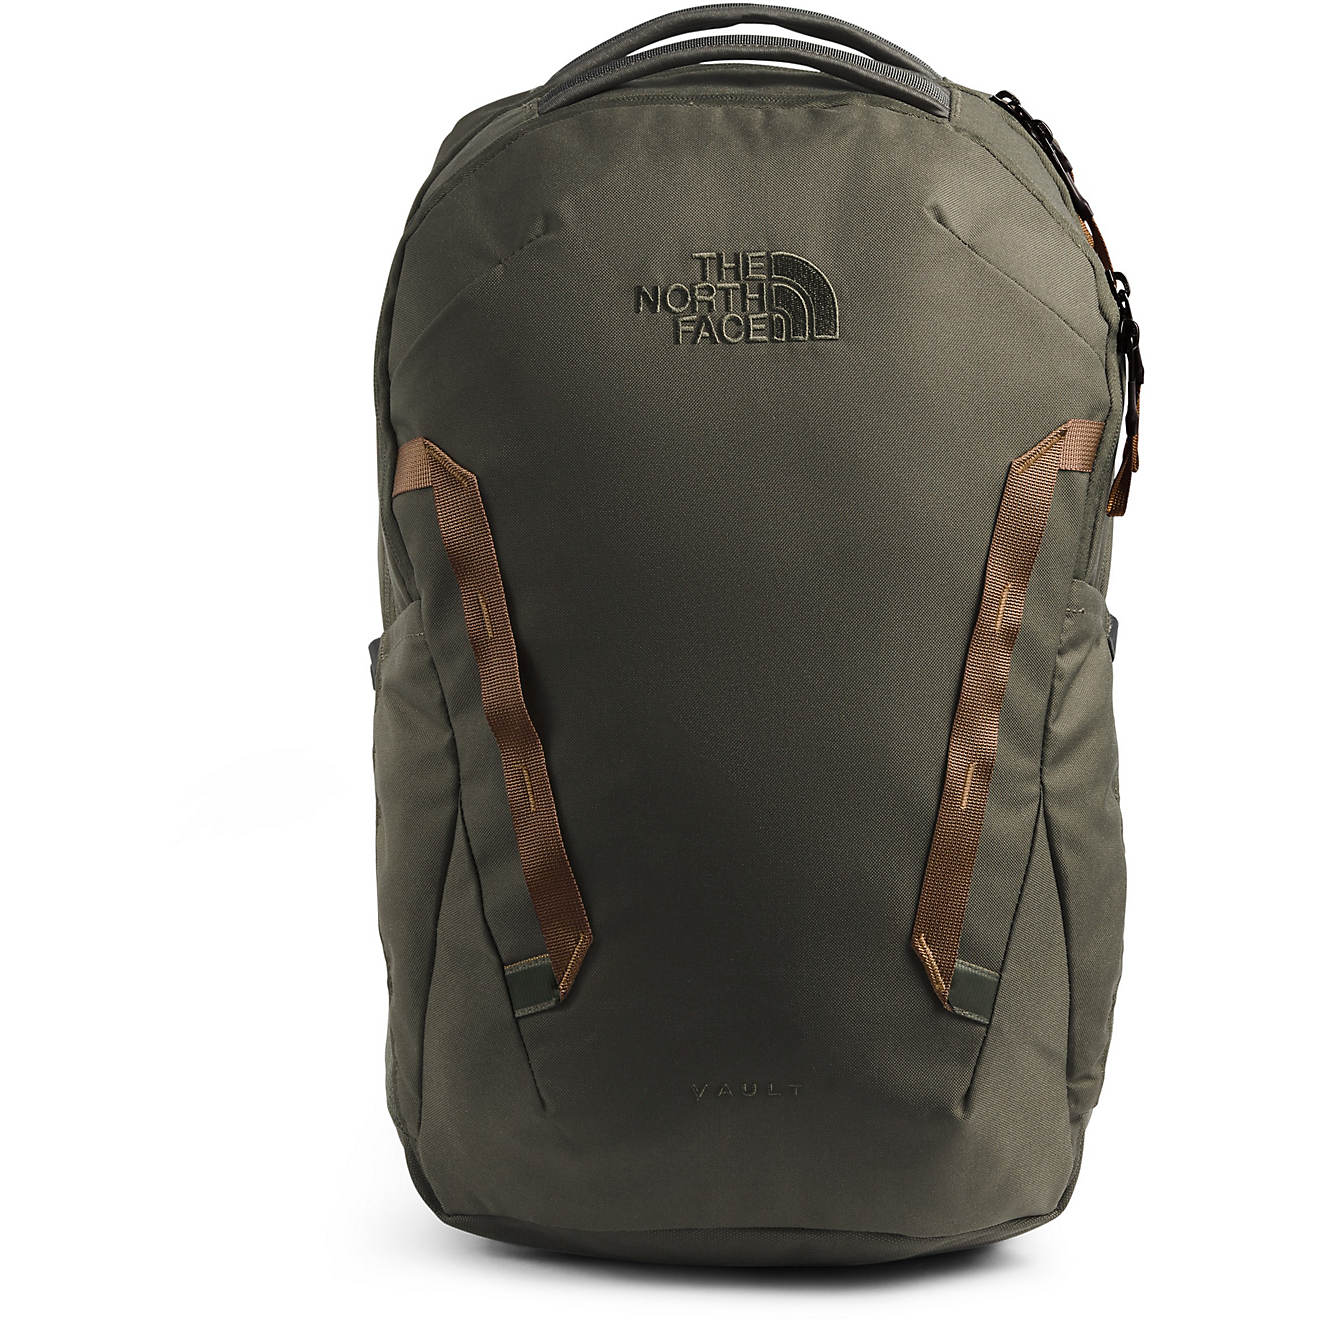 The North Face Vault Backpack | Academy